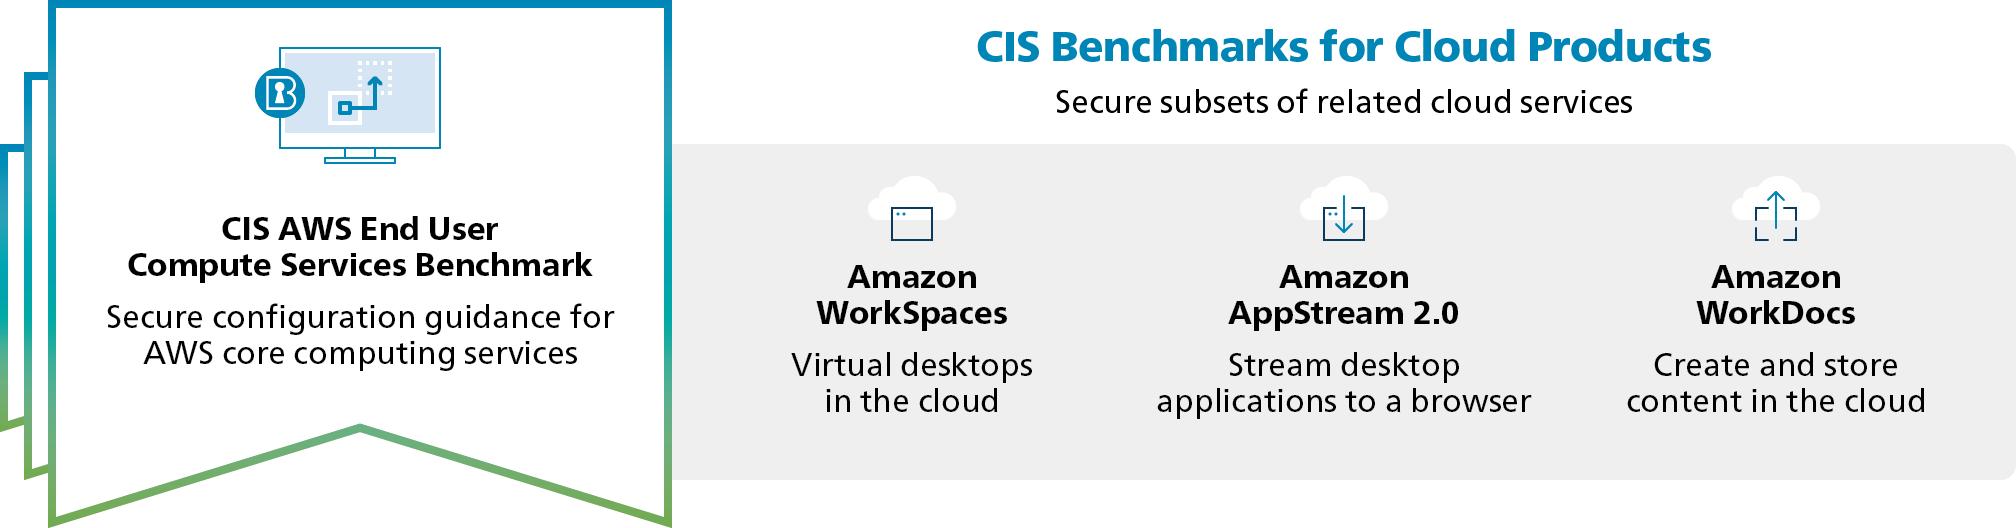 CIS-AWS_End_User_Compute_Services_Benchmarks-Cloud_Products